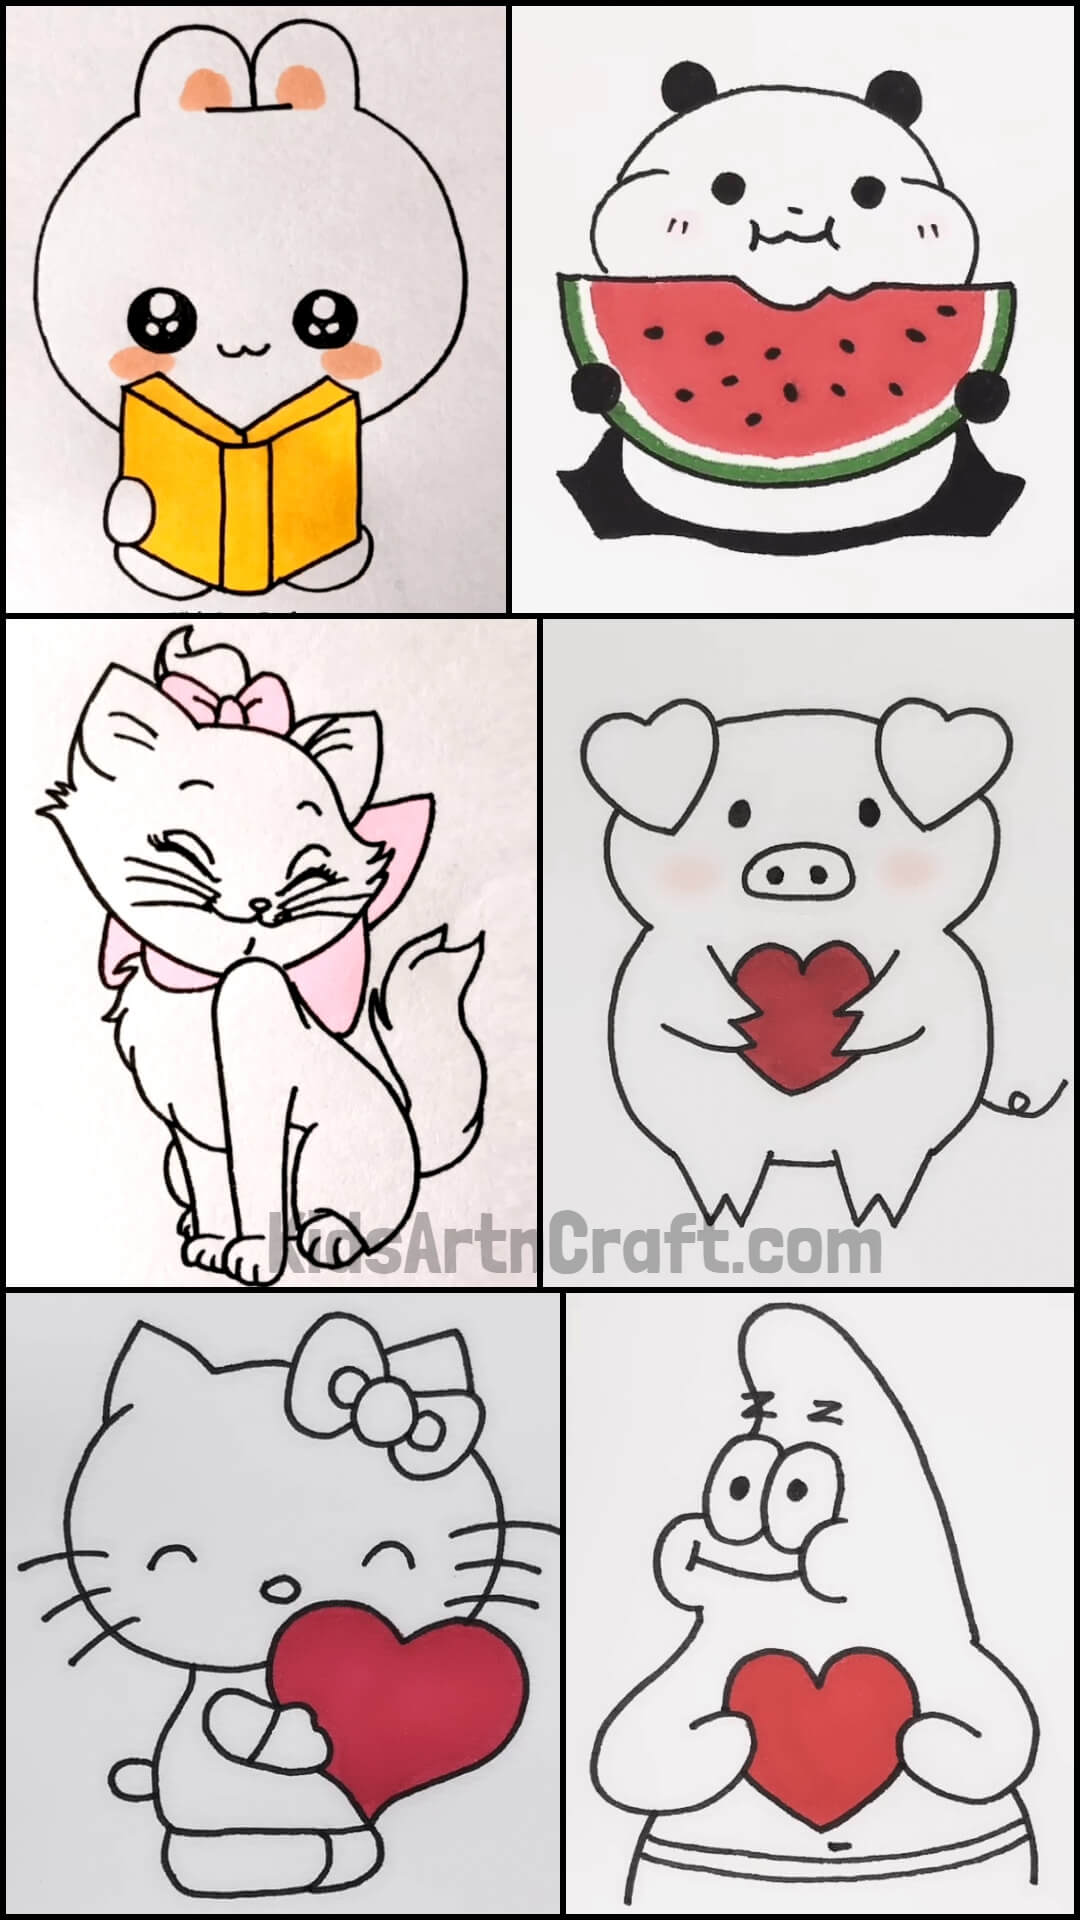 Cute Animals - Easy to Make Drawings for Kids